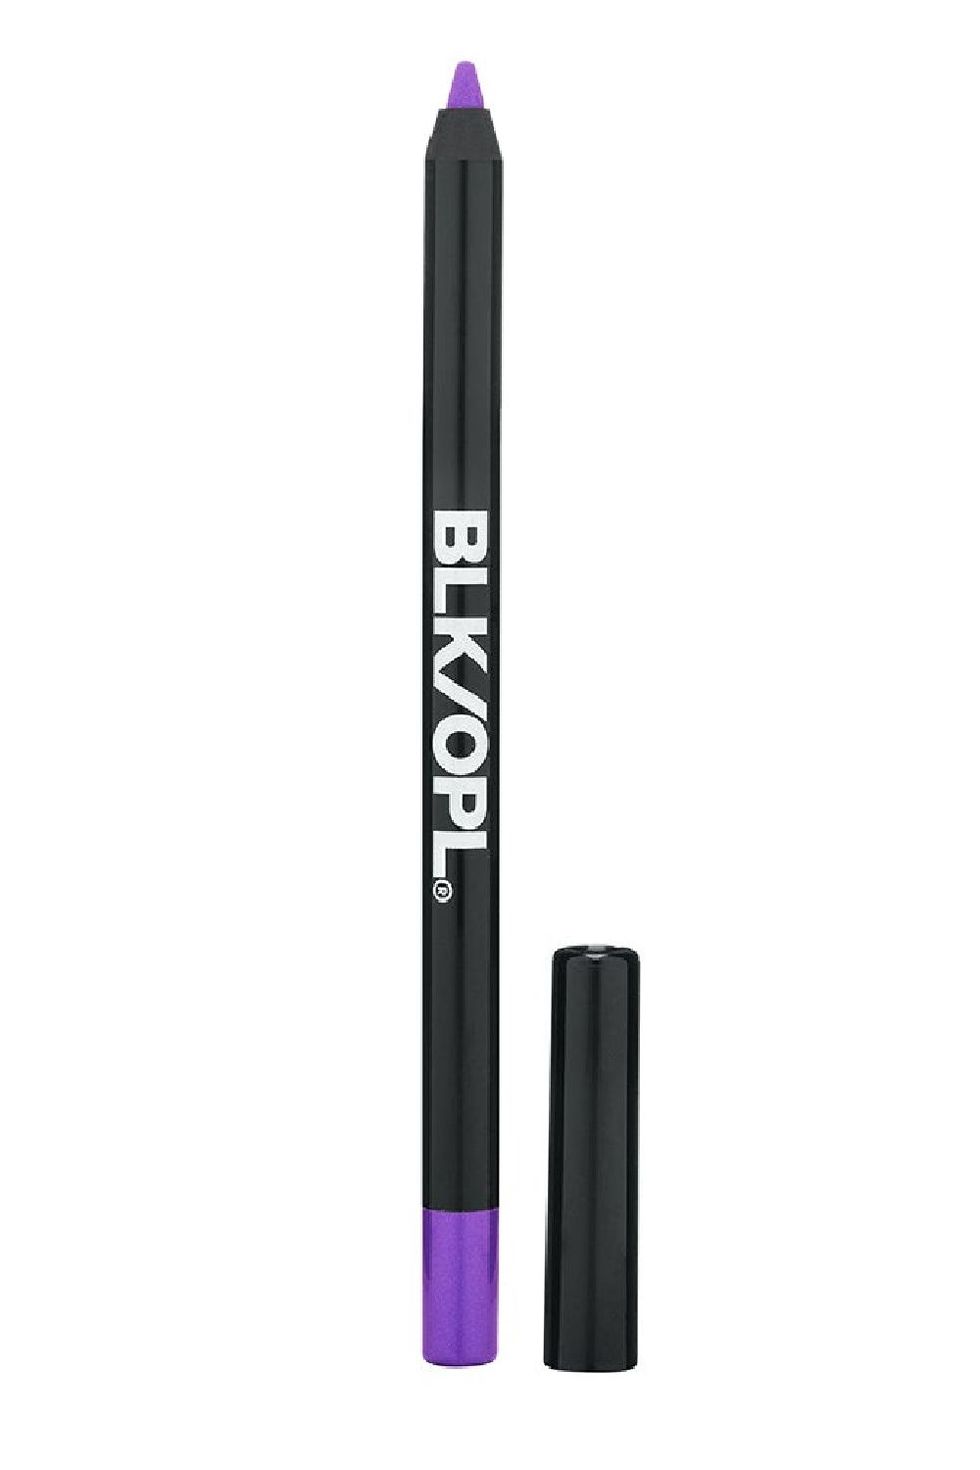 19 Best Colored Eyeliners of 2023 - Colorful Liquid and Gel Liners